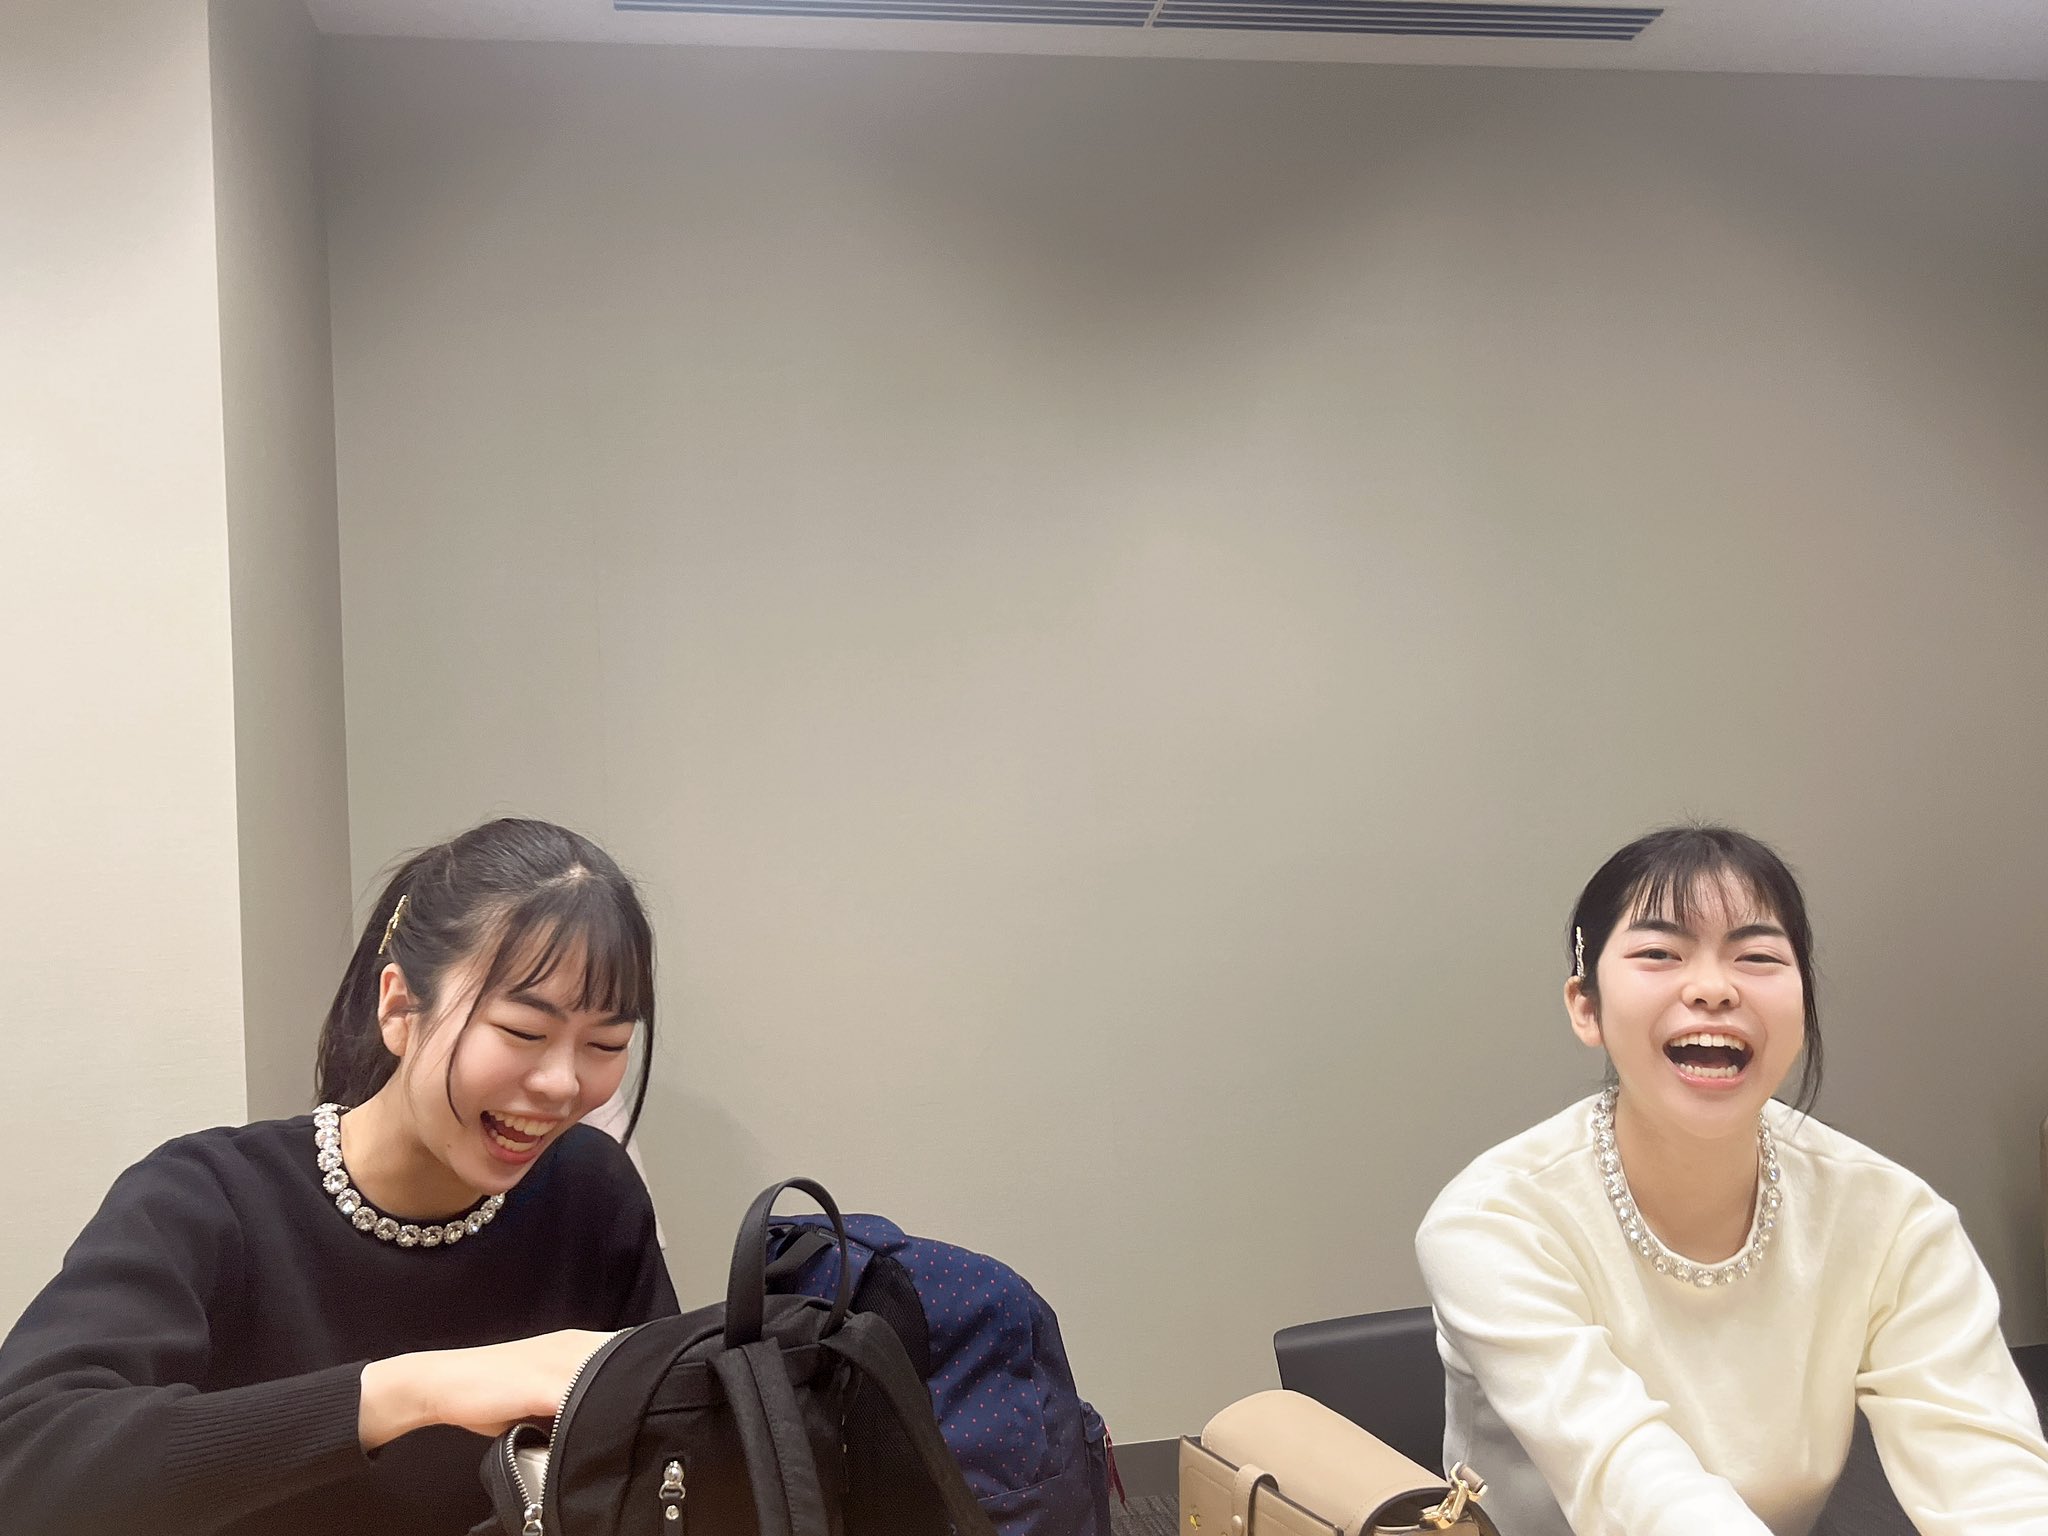 The two Ueno sisters 13 and 14 amused, 2023 (Image credit: Fujisawa Rina Twitter)